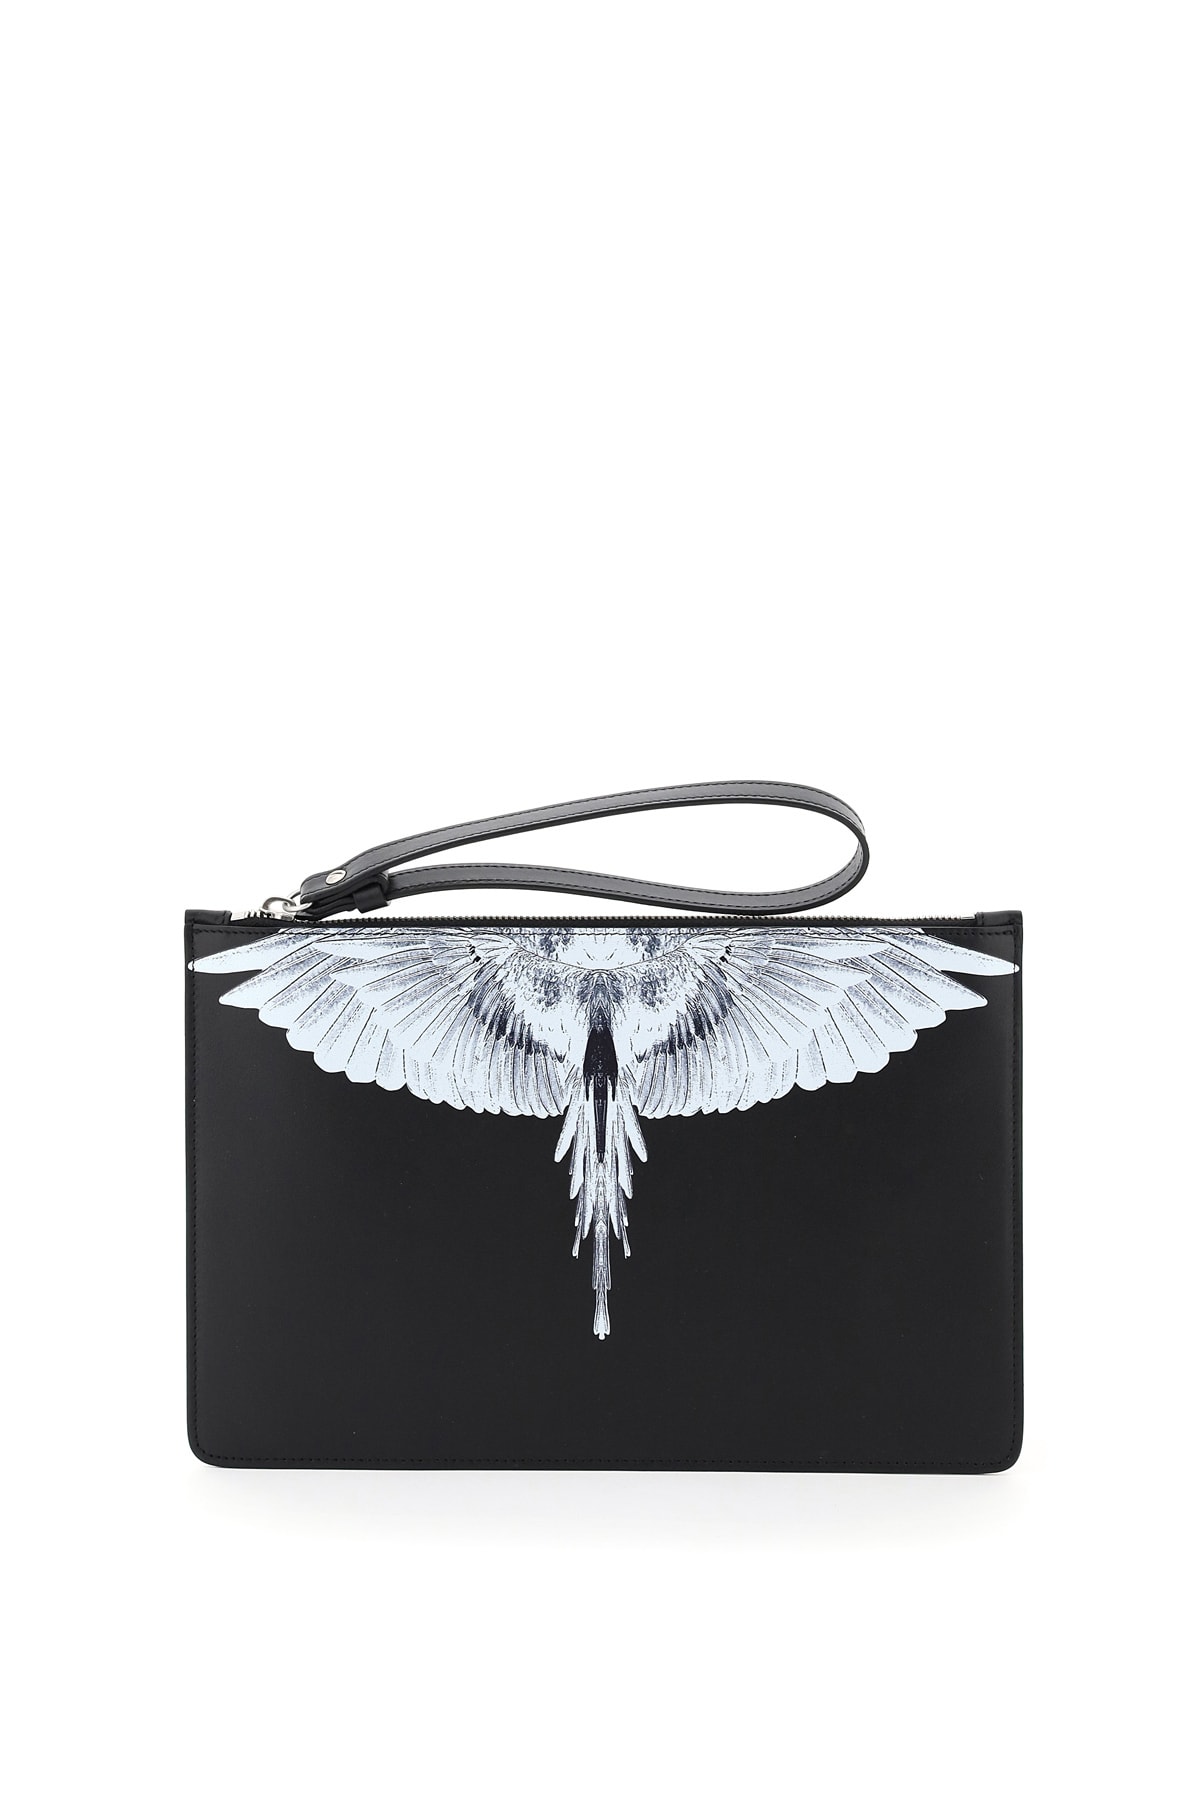 Marcelo Burlon Pouch With Wings Print